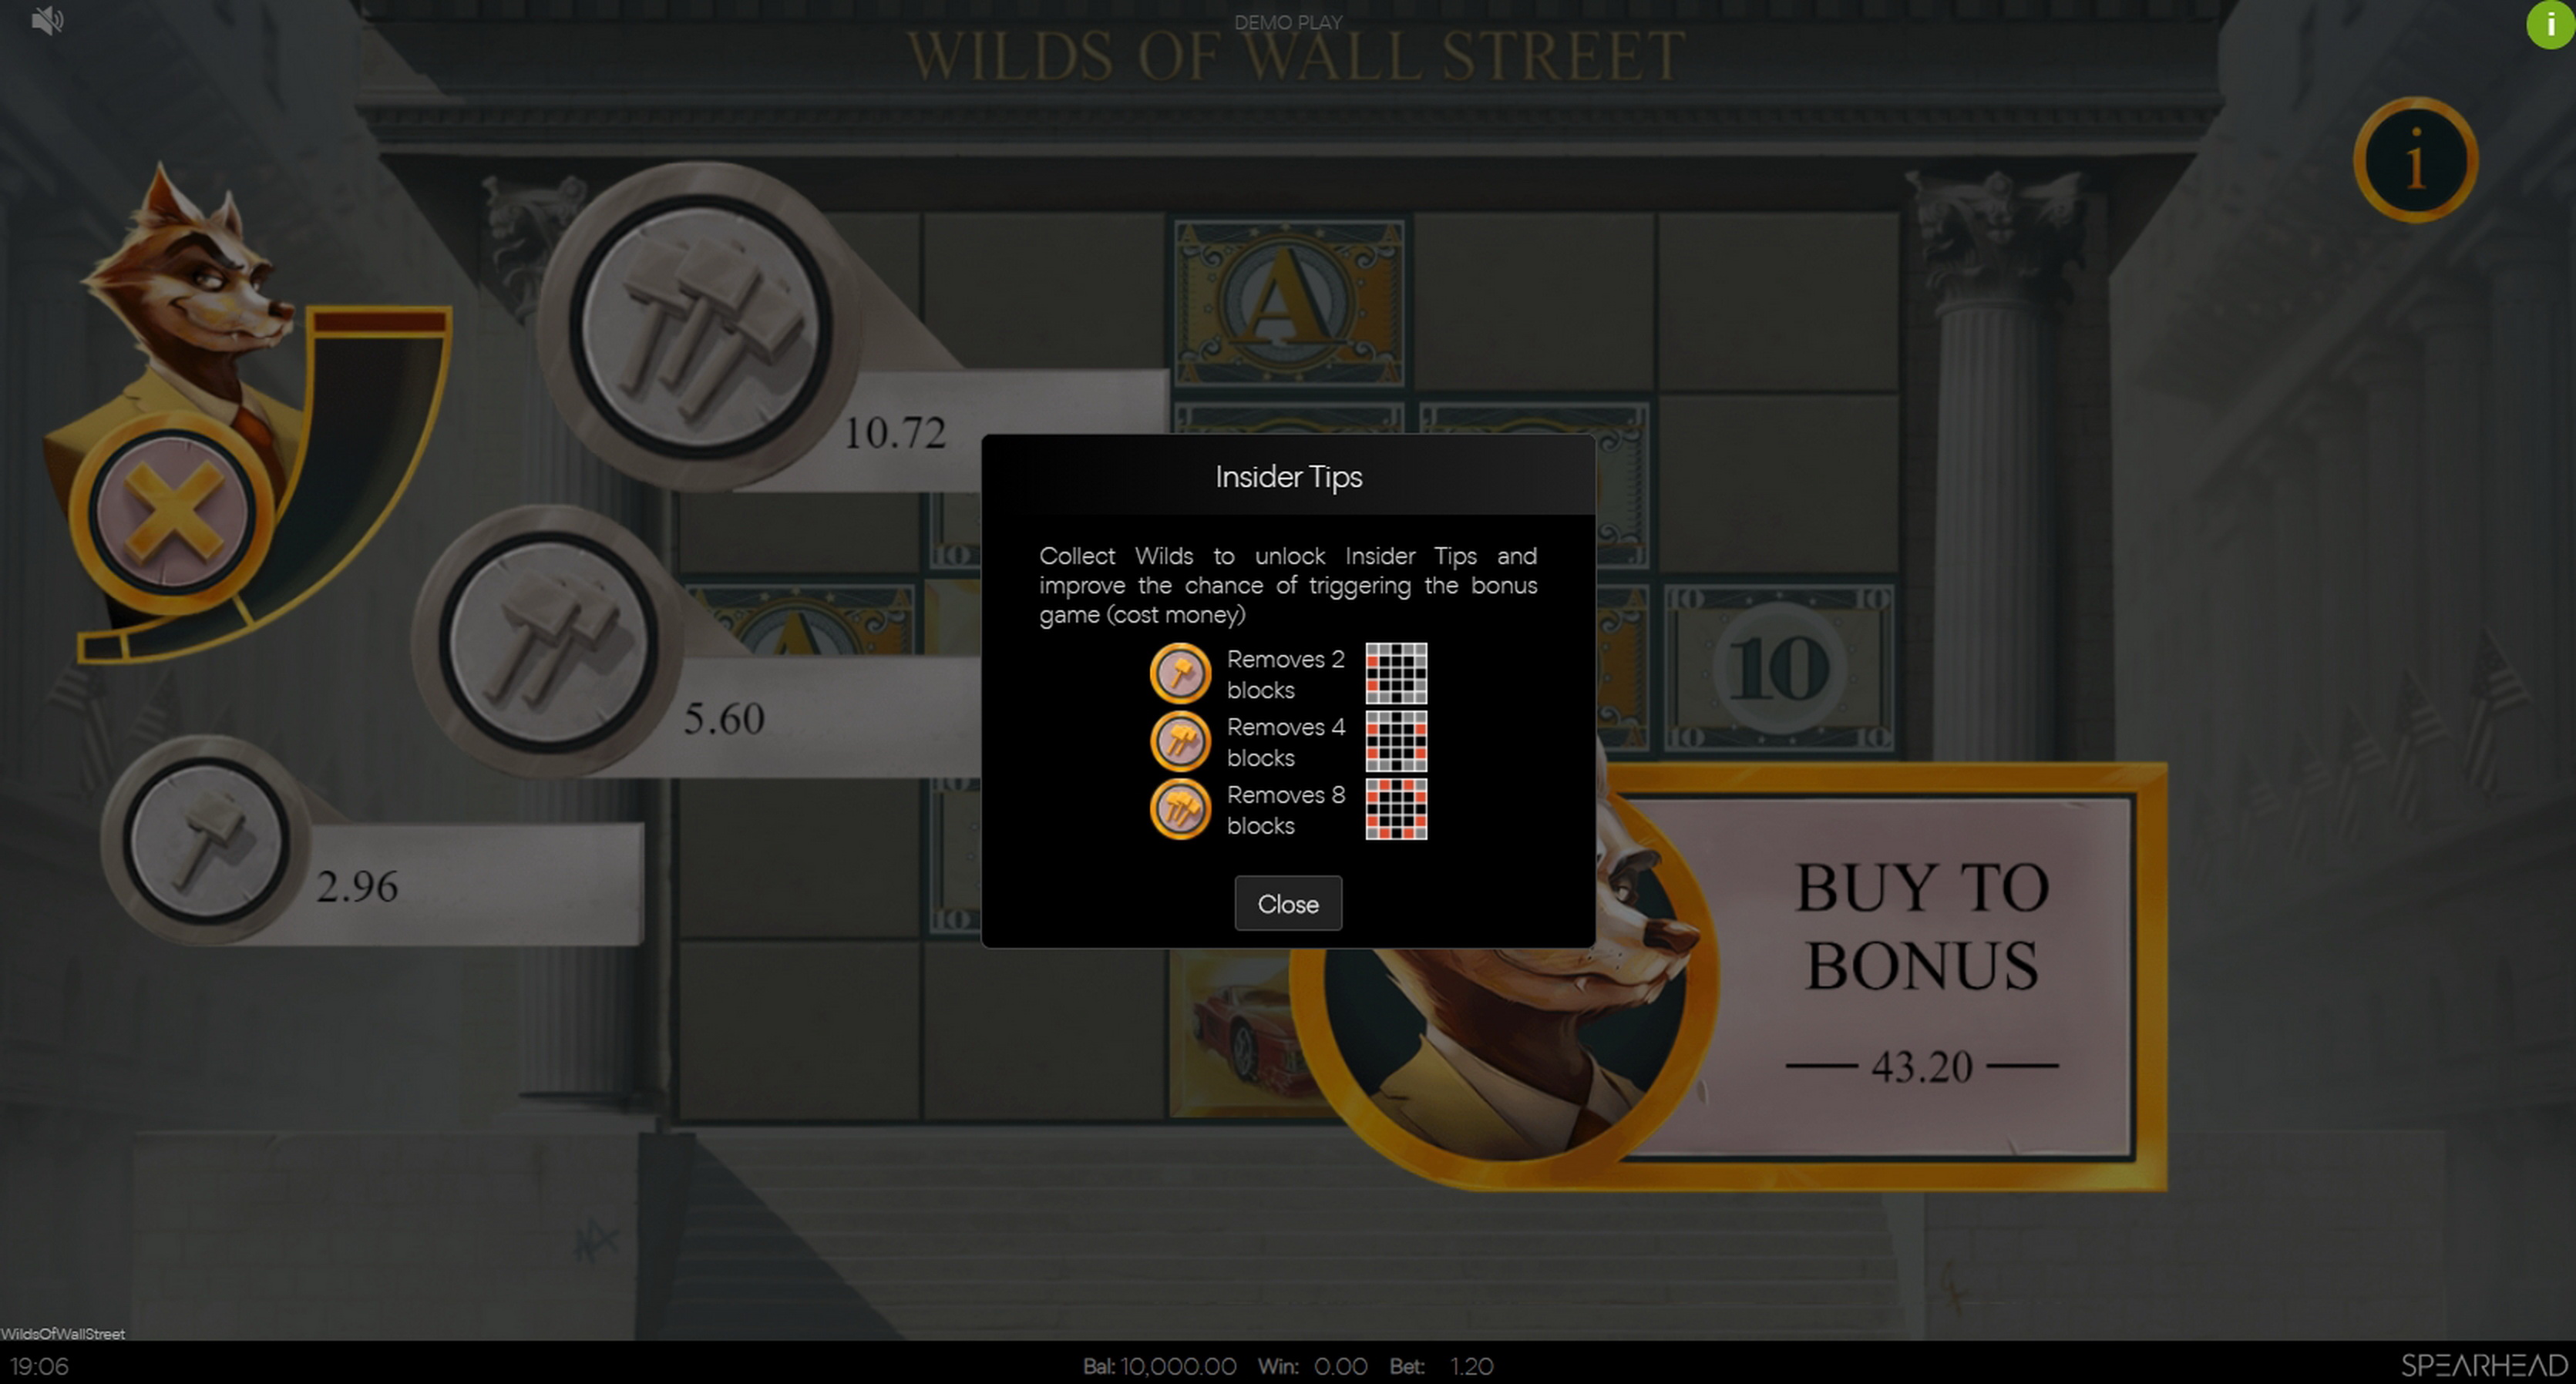 Info of Wilds of Wall Street Slot Game by Spearhead Studios